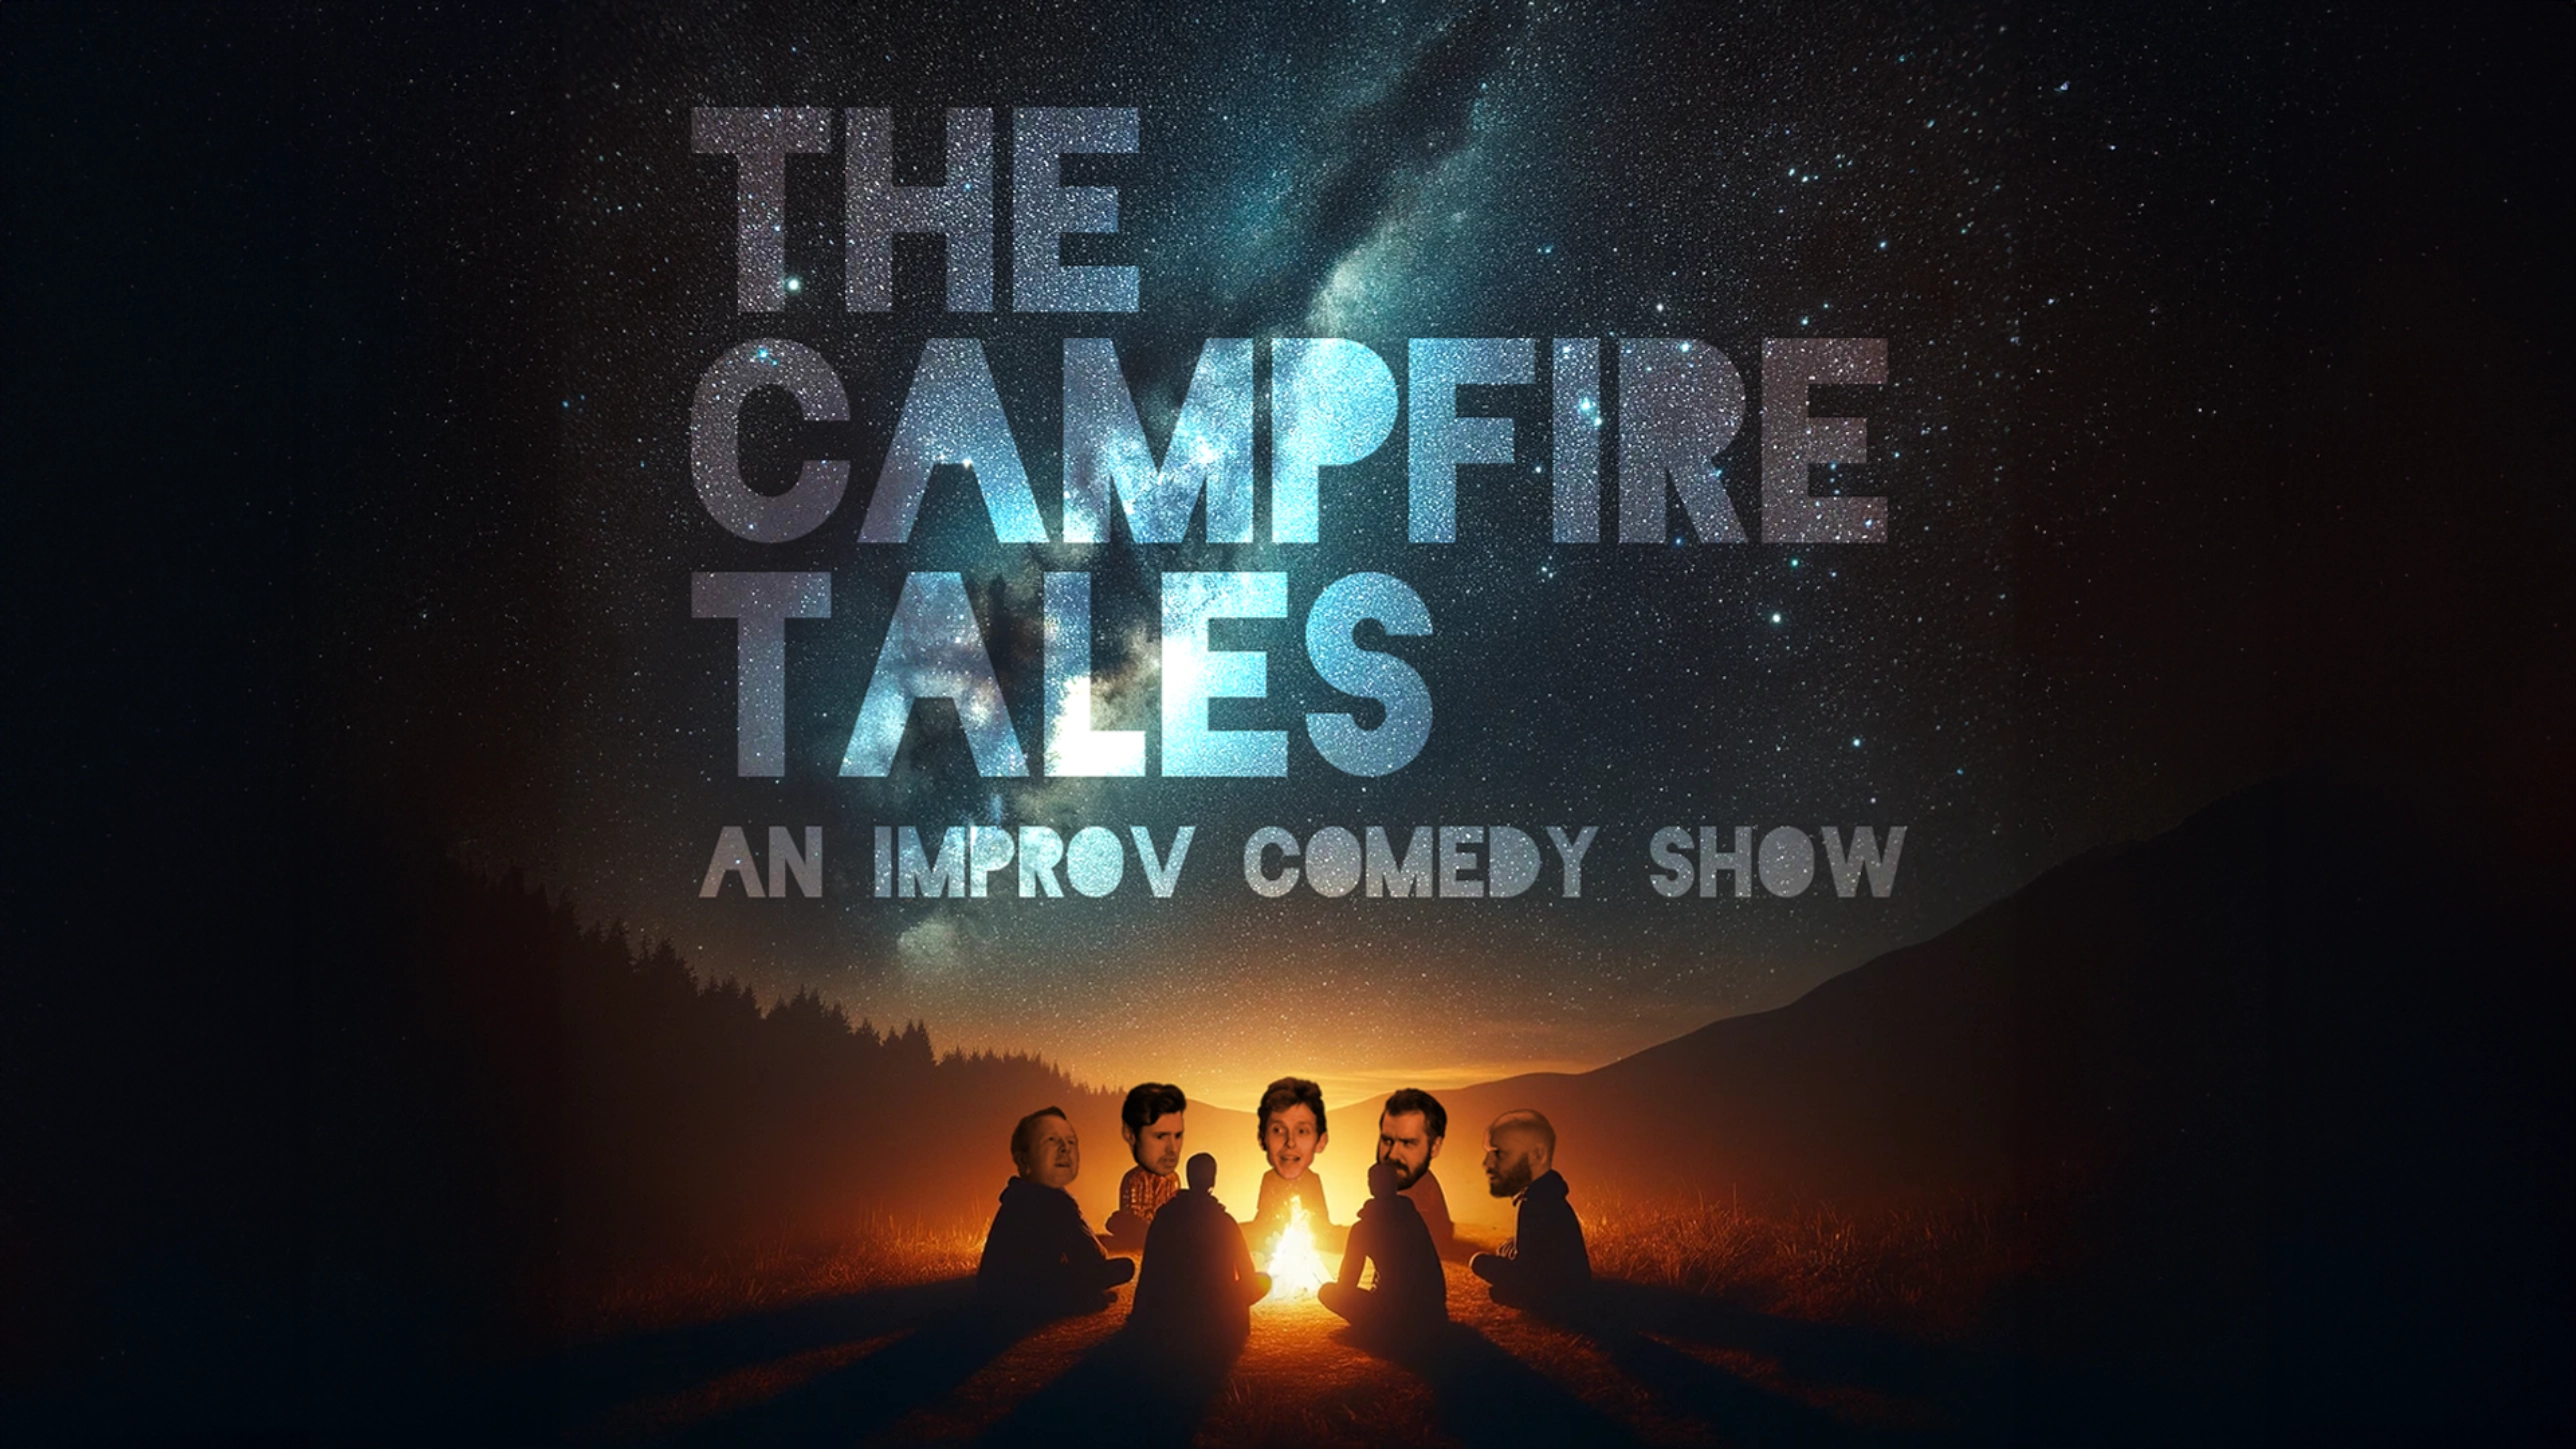 The Campfire Tales: An Improv Comedy Show